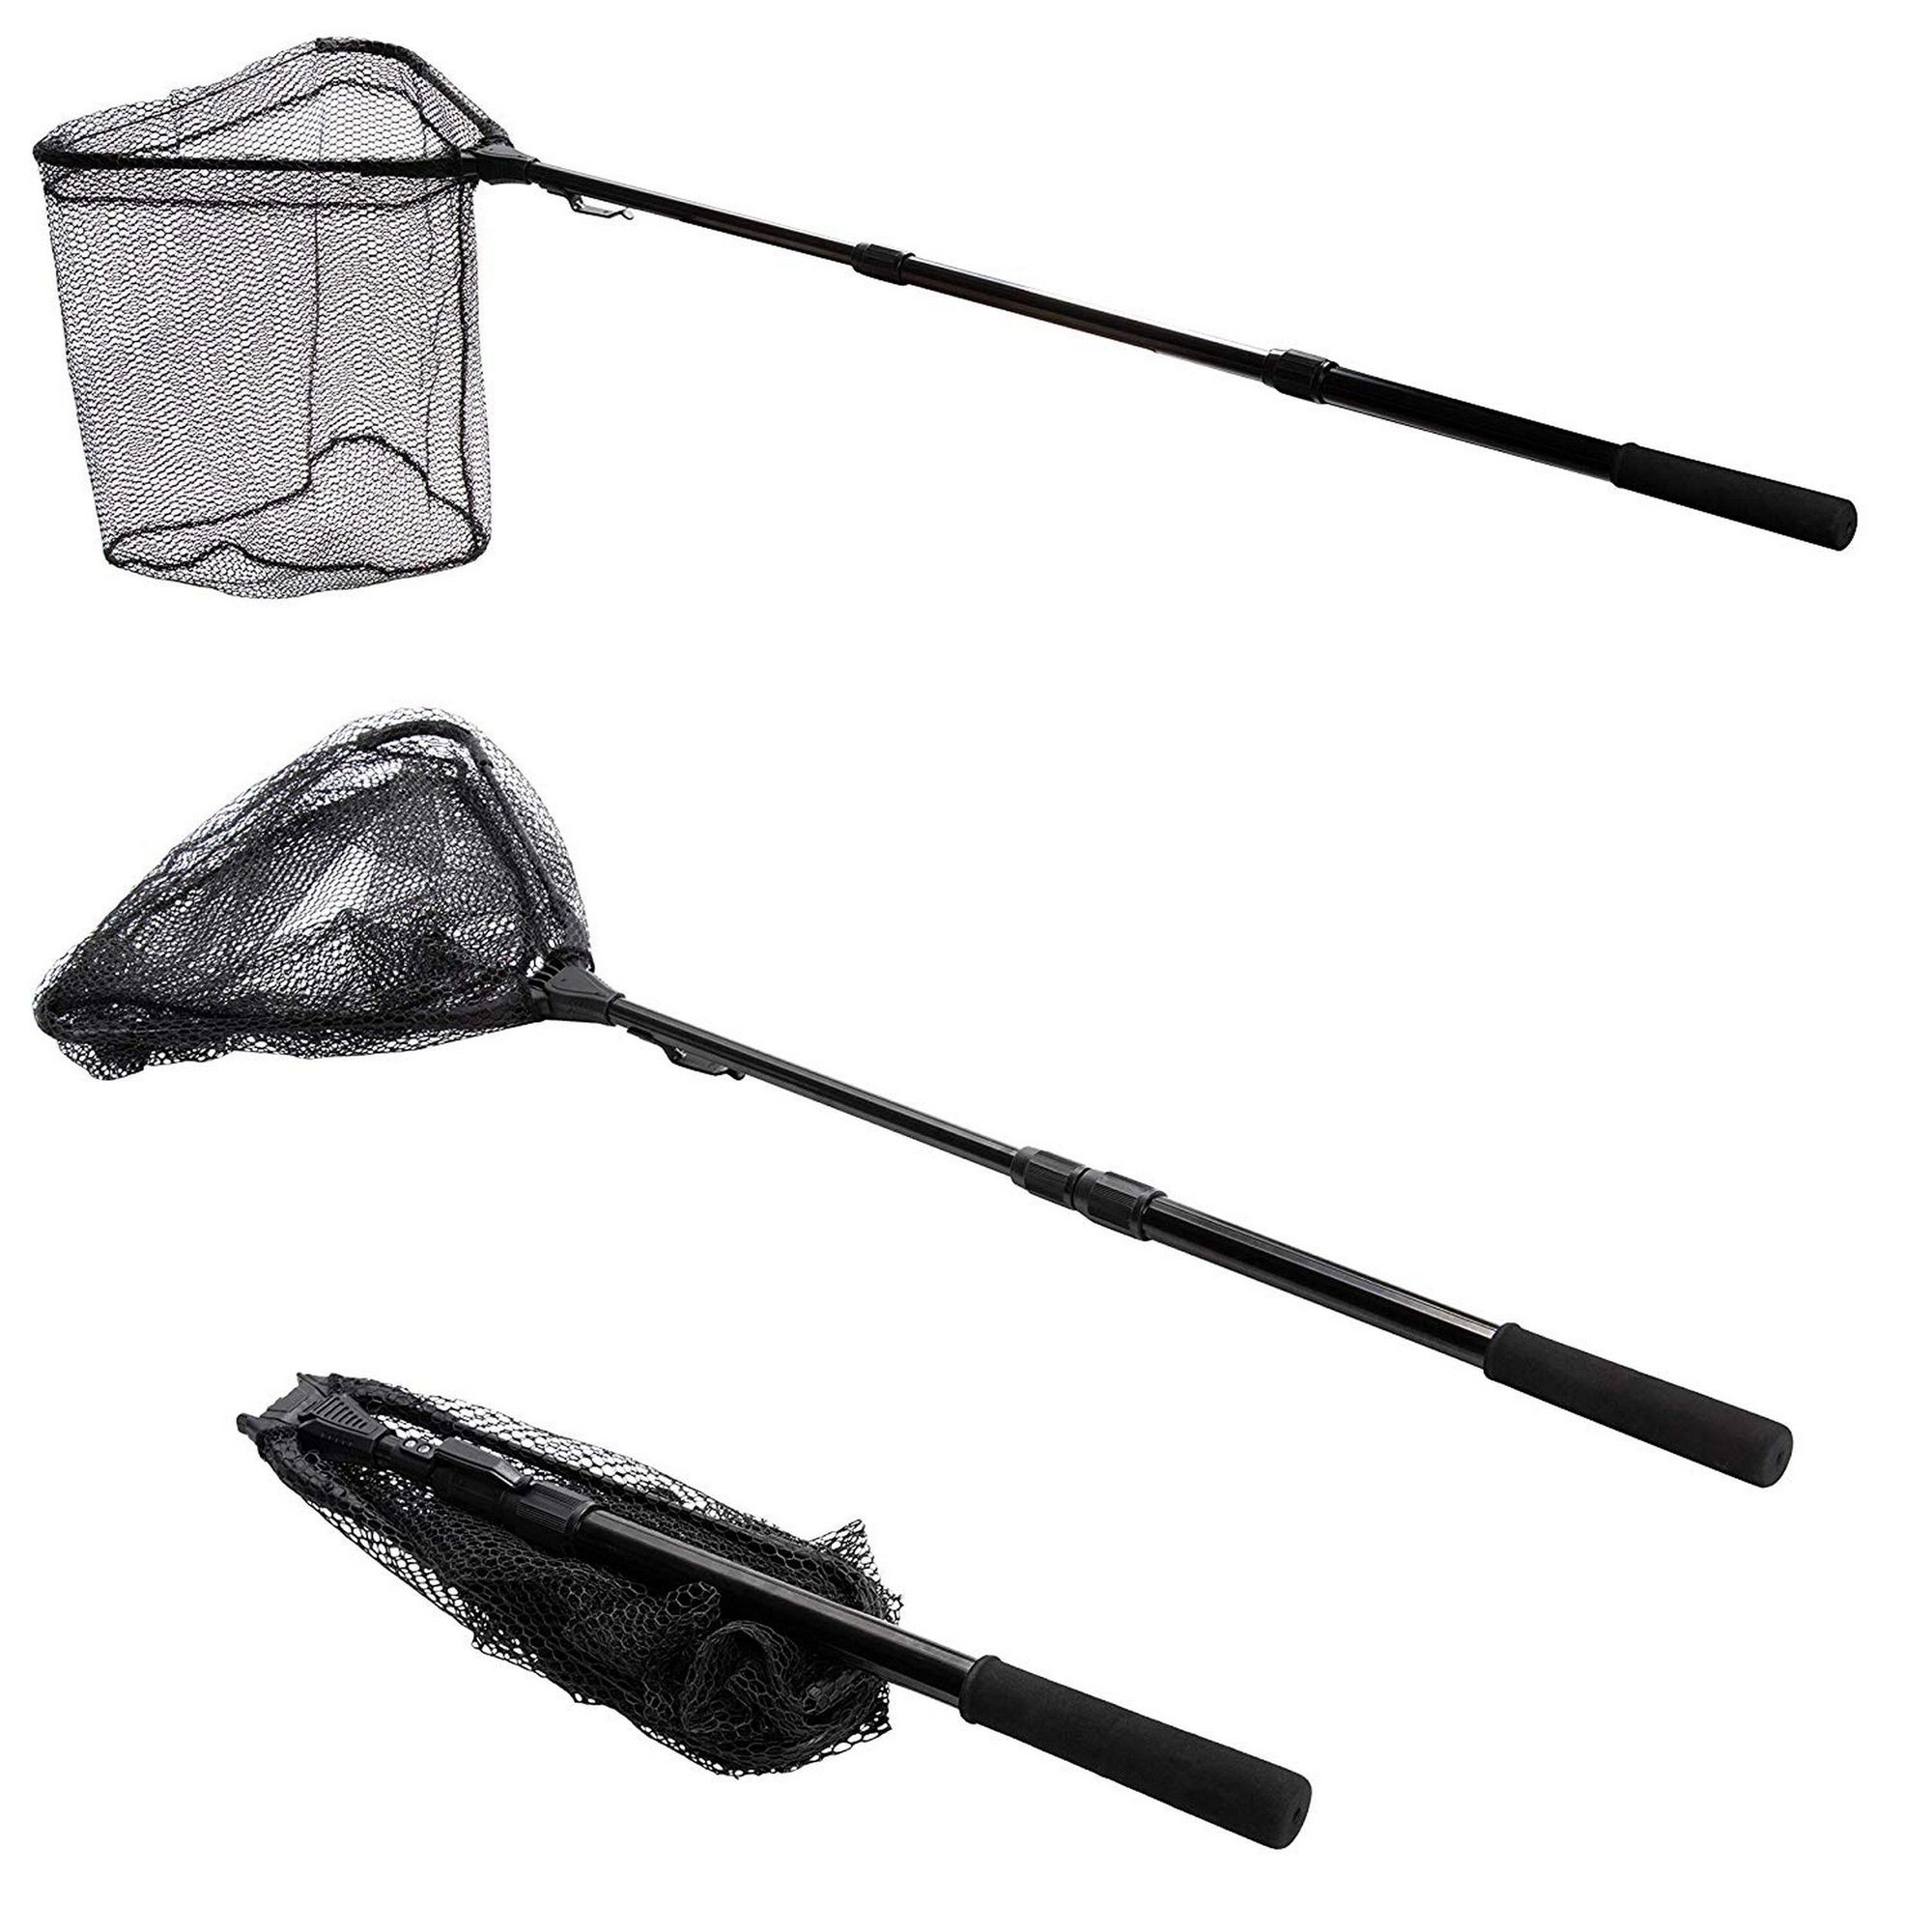 Juvale Fishing Net with Telescopic Foldable Extendable Pole Catch and Release Friendly Length Extends to 42.5 Inches